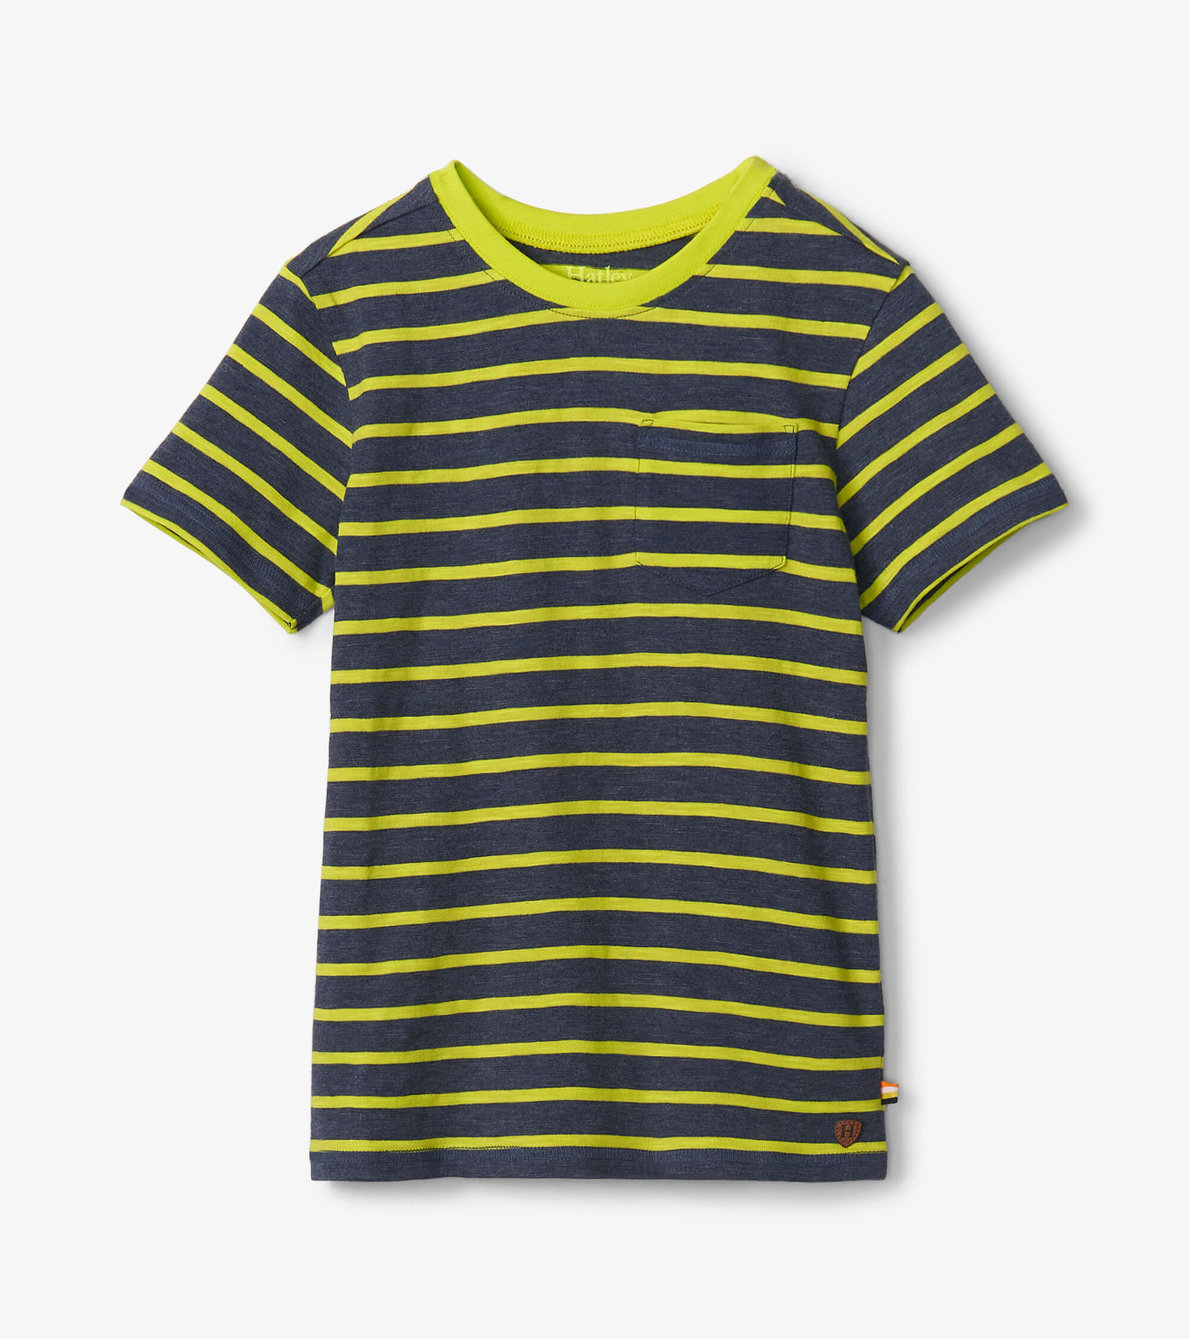 View larger image of Retro Stripes Striped Pocket Tee